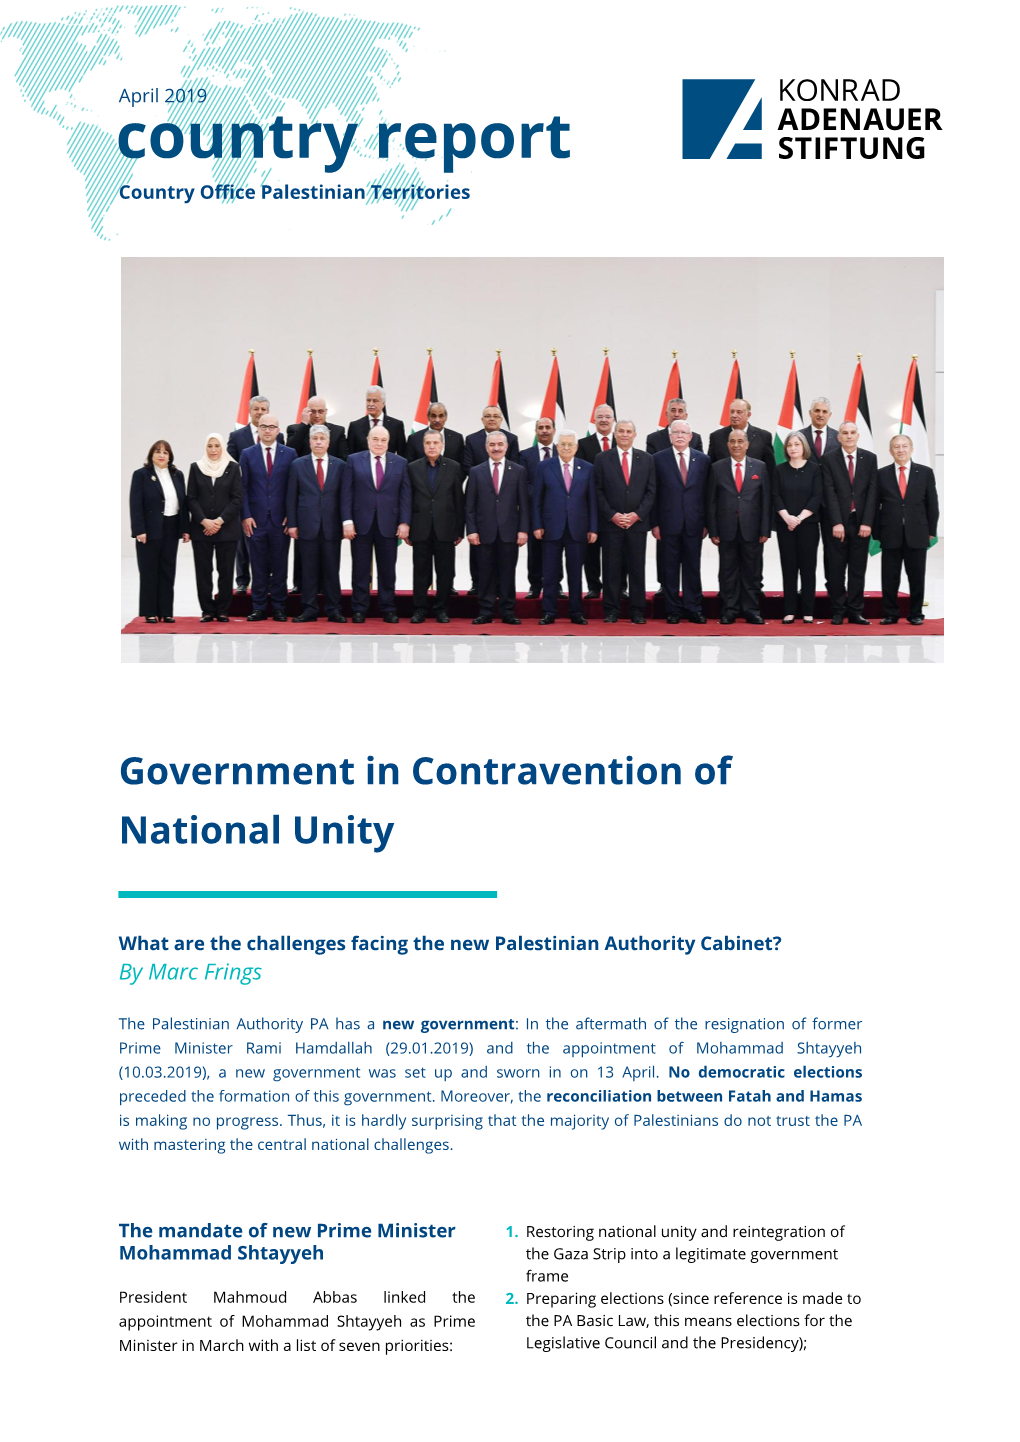 Government in Contravention of National Unity